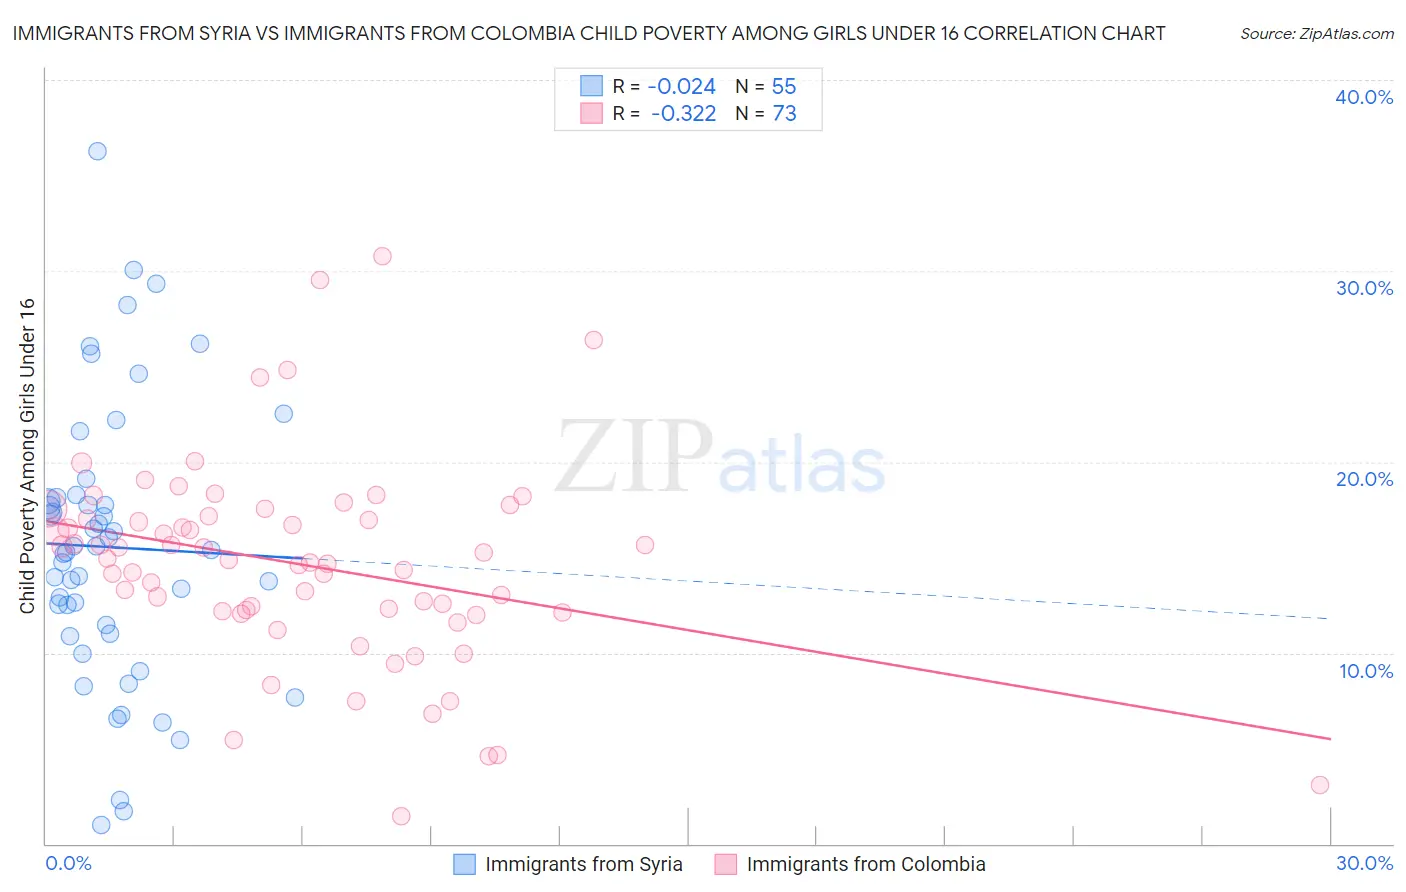 Immigrants from Syria vs Immigrants from Colombia Child Poverty Among Girls Under 16